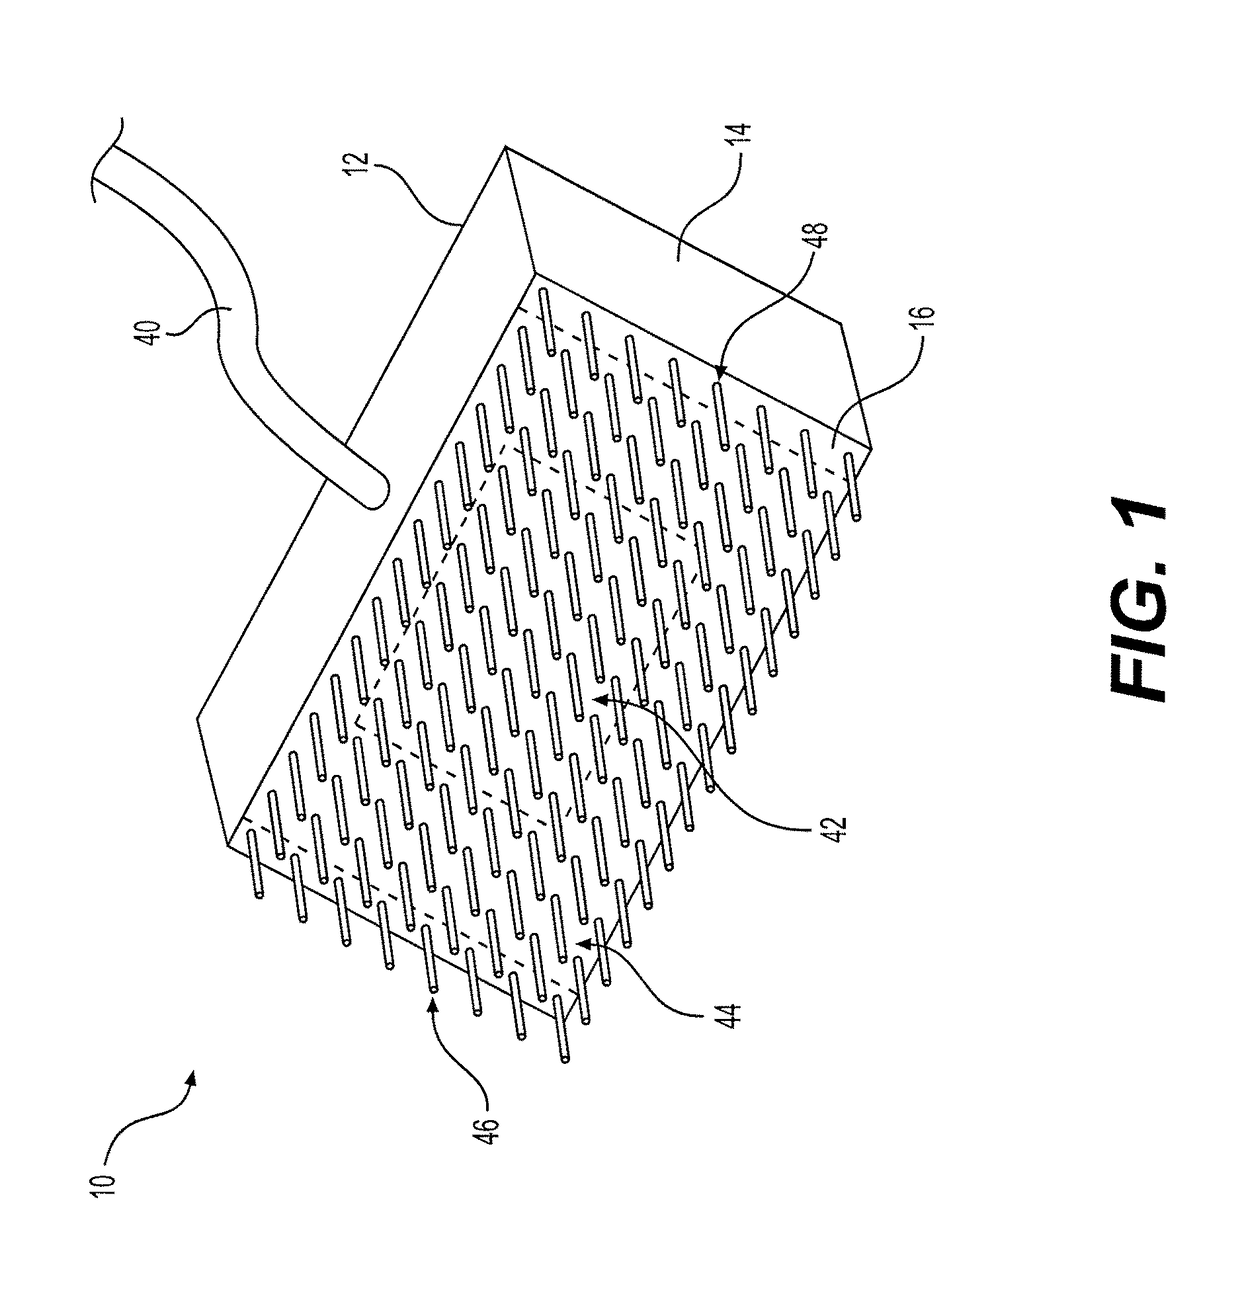 Combination microarray patch for drug delivery and electrochemotherapy device